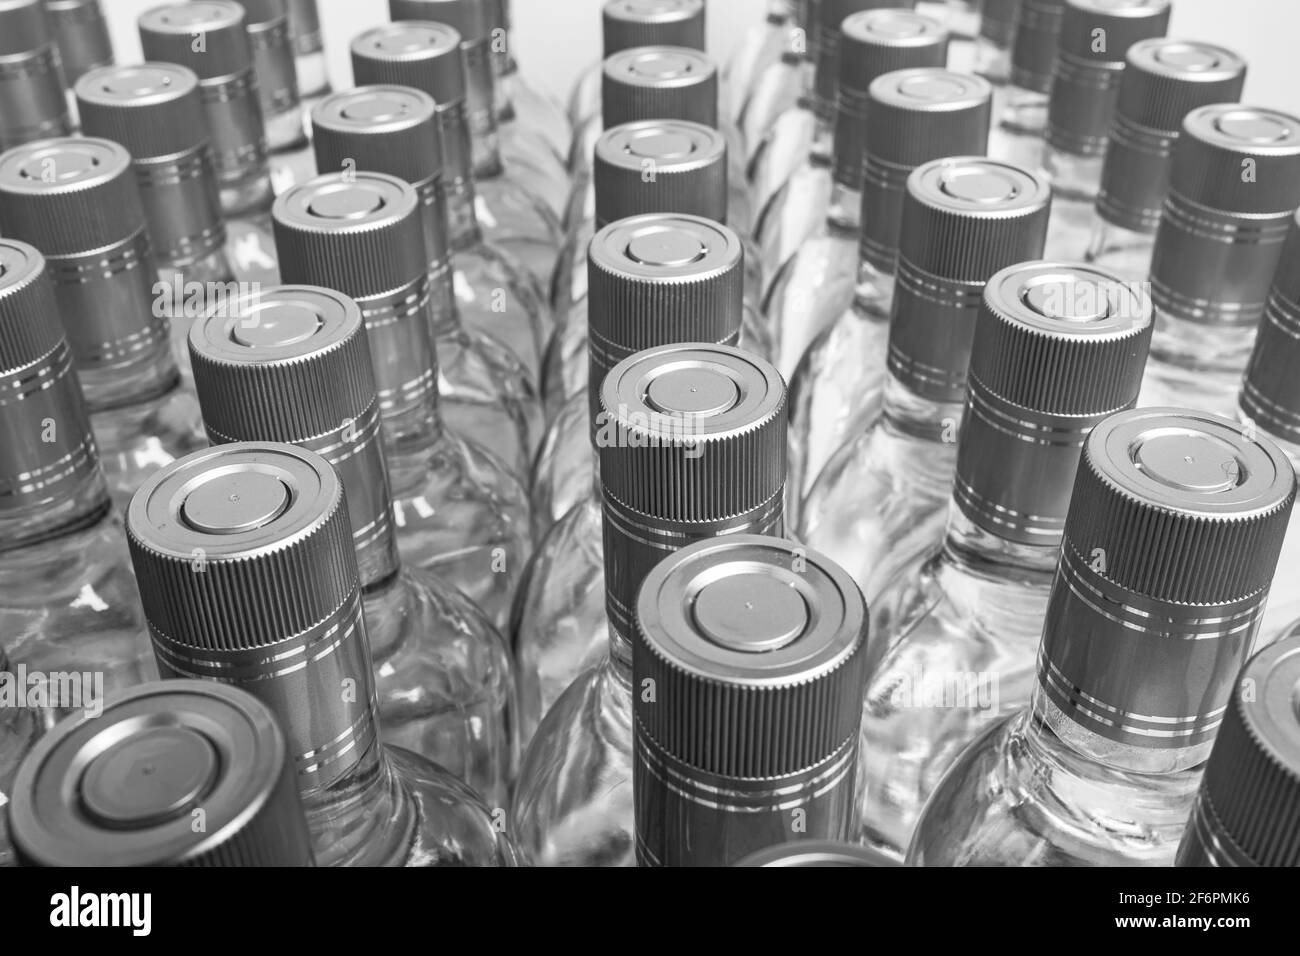 Multitude of pure alcohol bottles not labeled. Bottles of Home Alcoholic Beverages Isolated On White. Small liquor production based on distillation. B Stock Photo